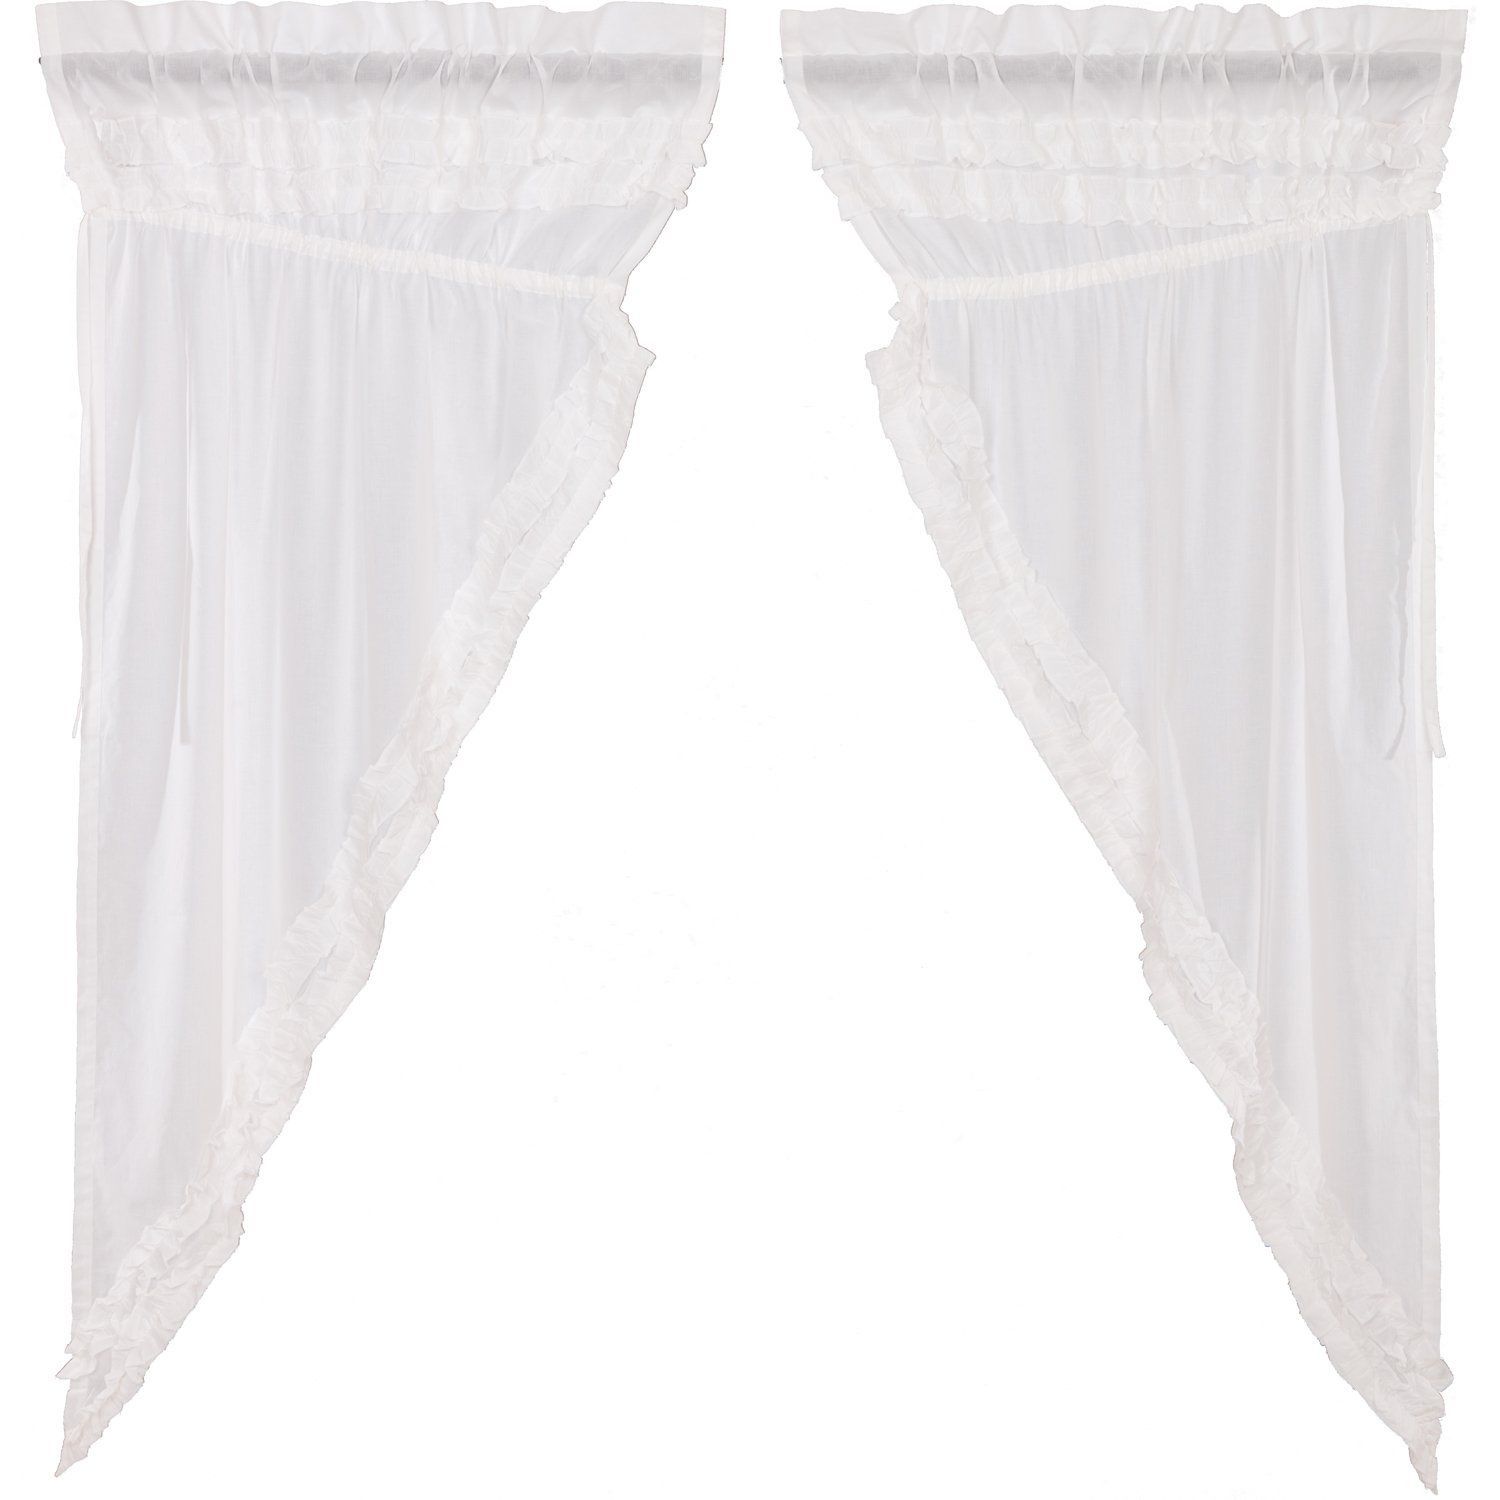 Simplicity Cambric White Ruffled Sheer Petticoat Prairie In White Ruffled Sheer Petticoat Tier Pairs (View 8 of 20)